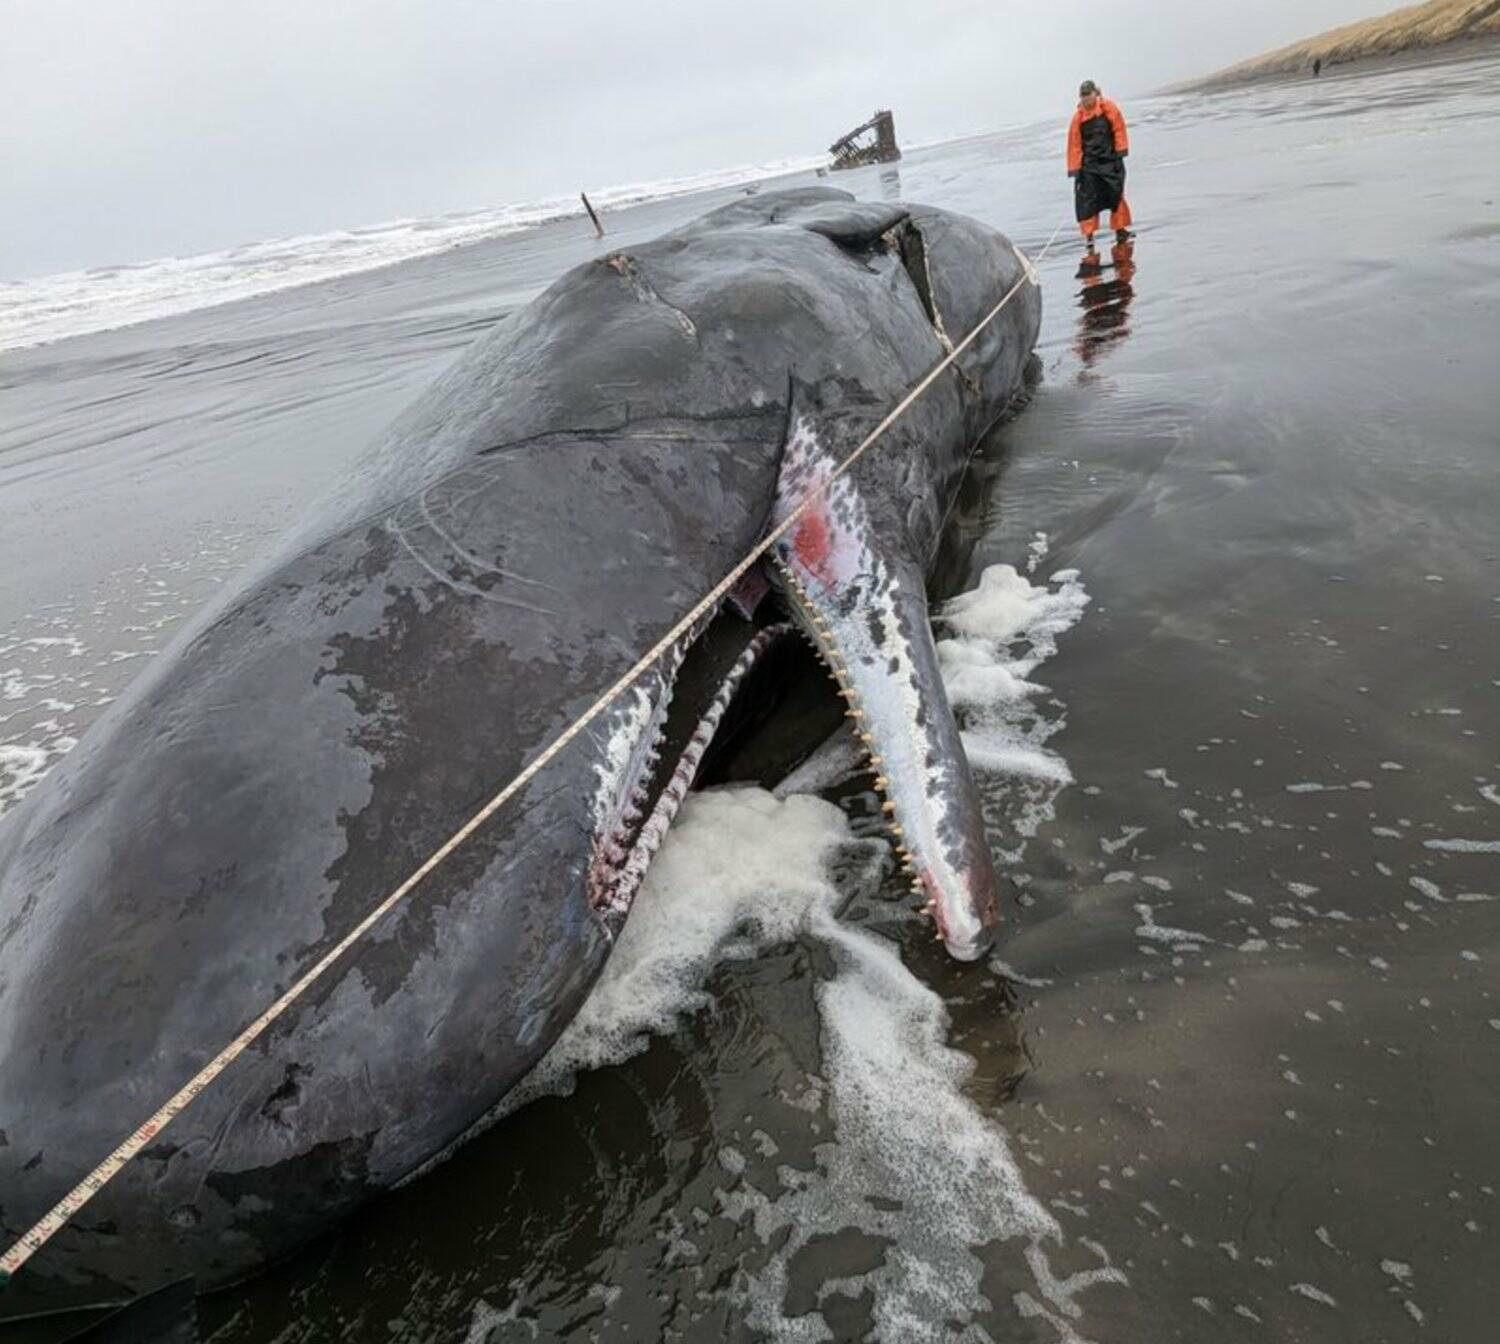 Courtesy photo / Oregon State Parks
A sperm whale beached on the Oregon coast near Fort Stevens State Park on Saturday, Jan. 14. A gash in the carcass suggests a vessel may have struck the whale, which would typically swim in deep waters only.